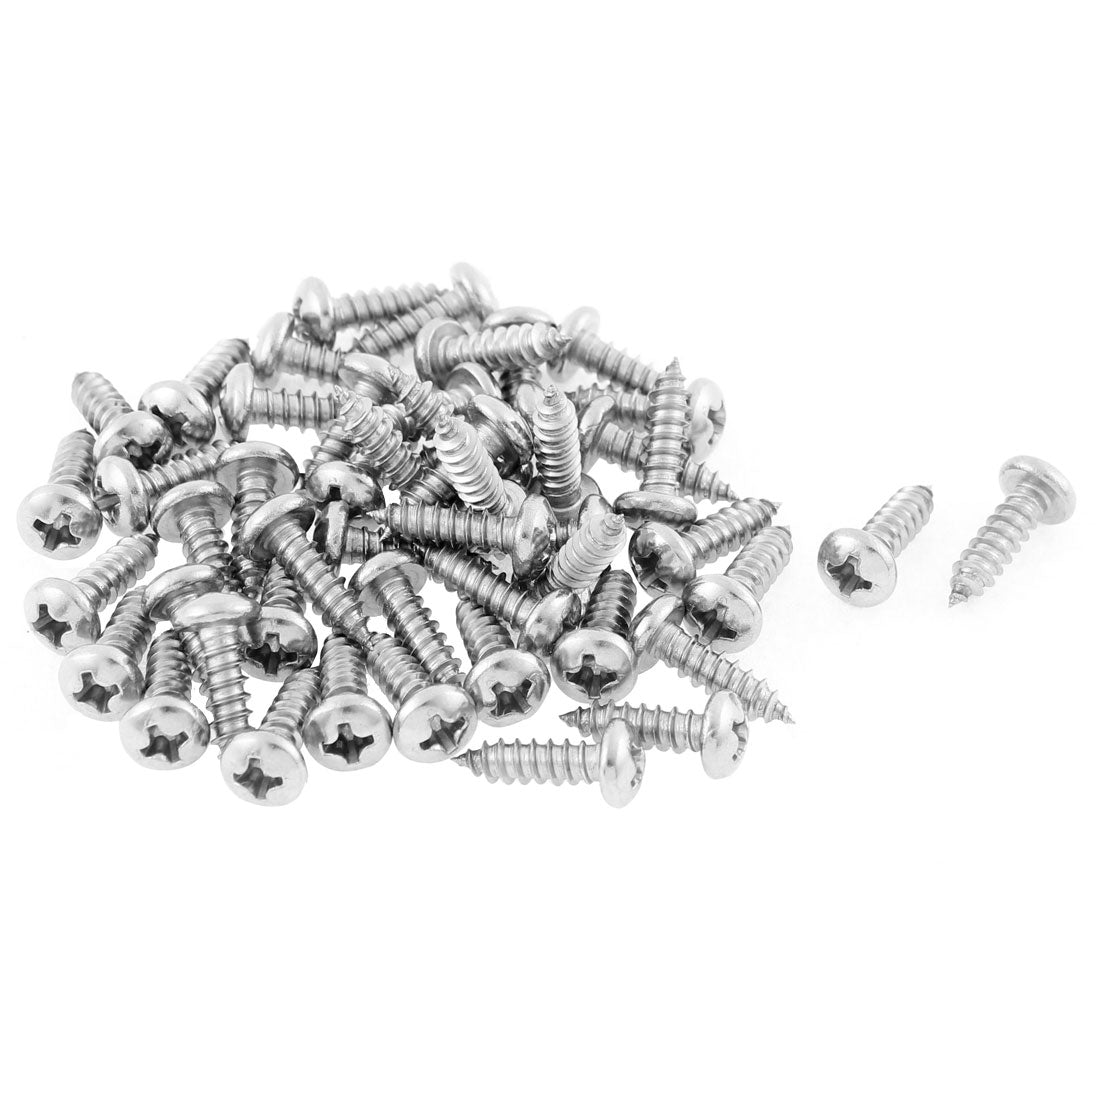 uxcell Uxcell 50 Pcs 3.9mmx13mm Stainless Steel Phillips Round  Sheet Self Tapping Screws